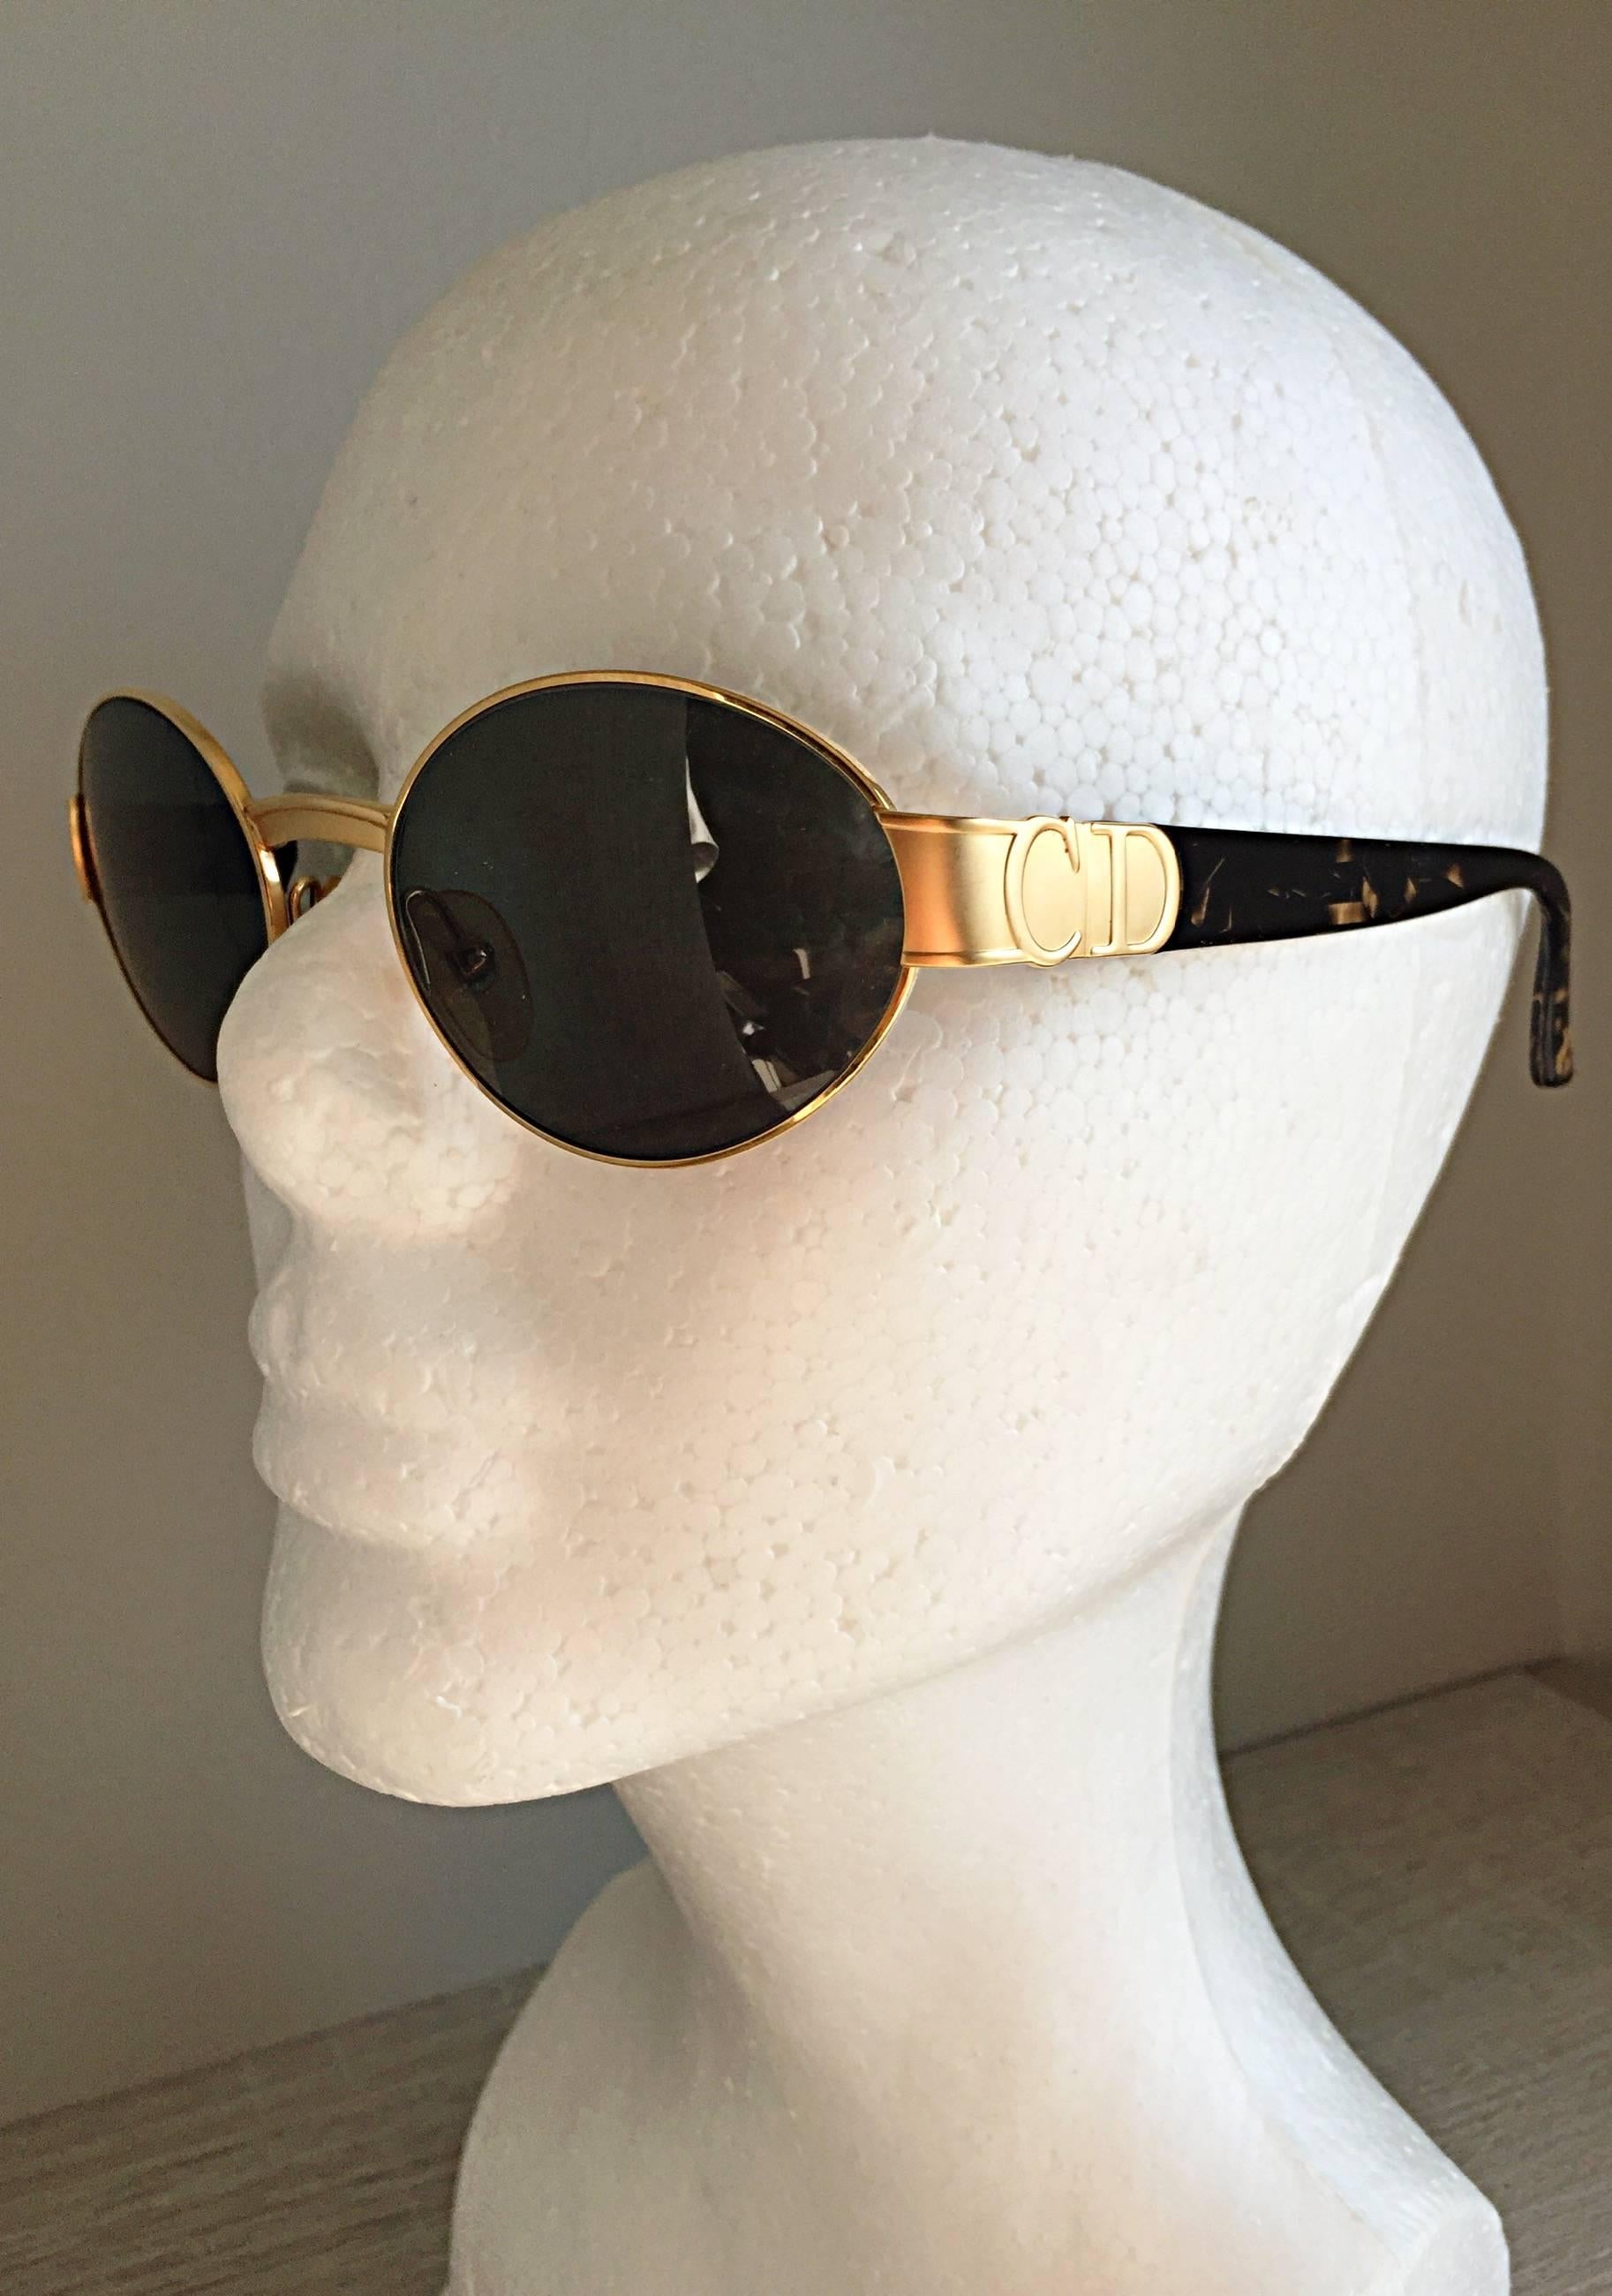 Rare vintage CHRISTIAN DIOR 90s round sunglasses! Amazing shape, that is so in style at the moment, and will remain a classic silhouette. Matte gold sides feature signature CD (on both sides of the frame). Cult classic sunglasses, that look great on